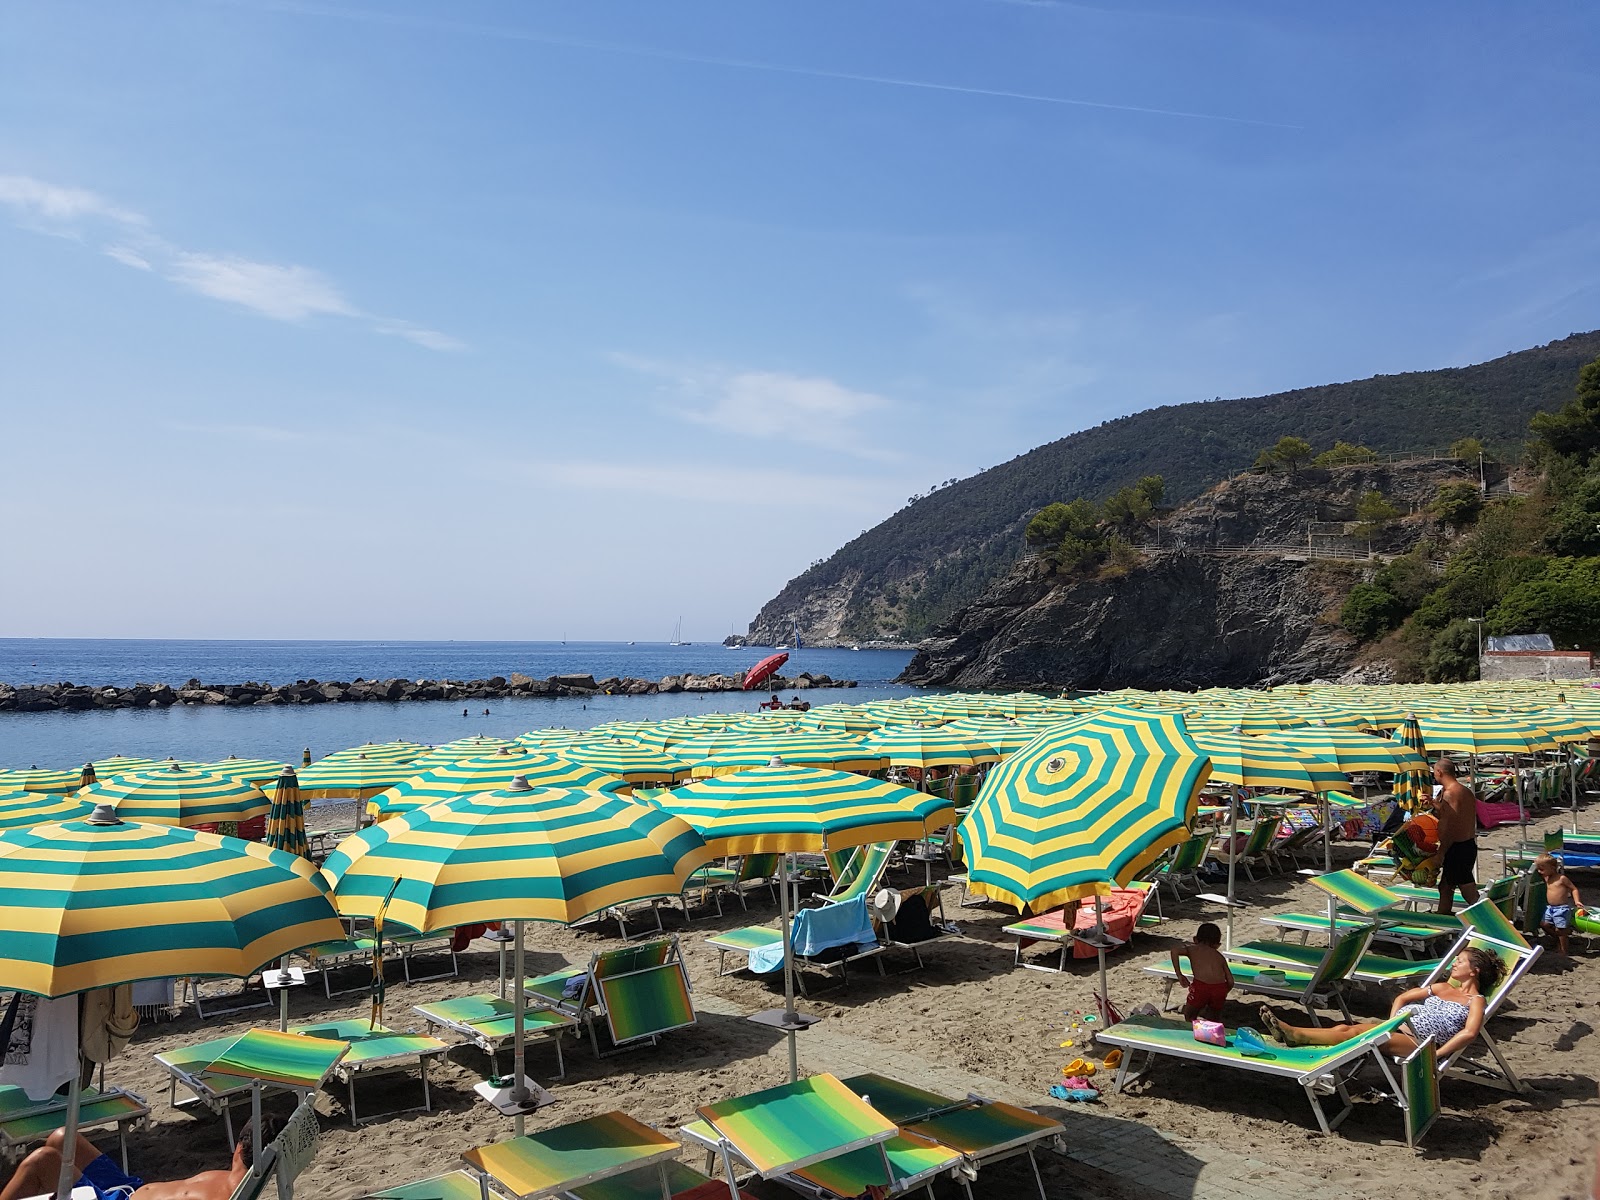 Photo of Moneglia beach - popular place among relax connoisseurs